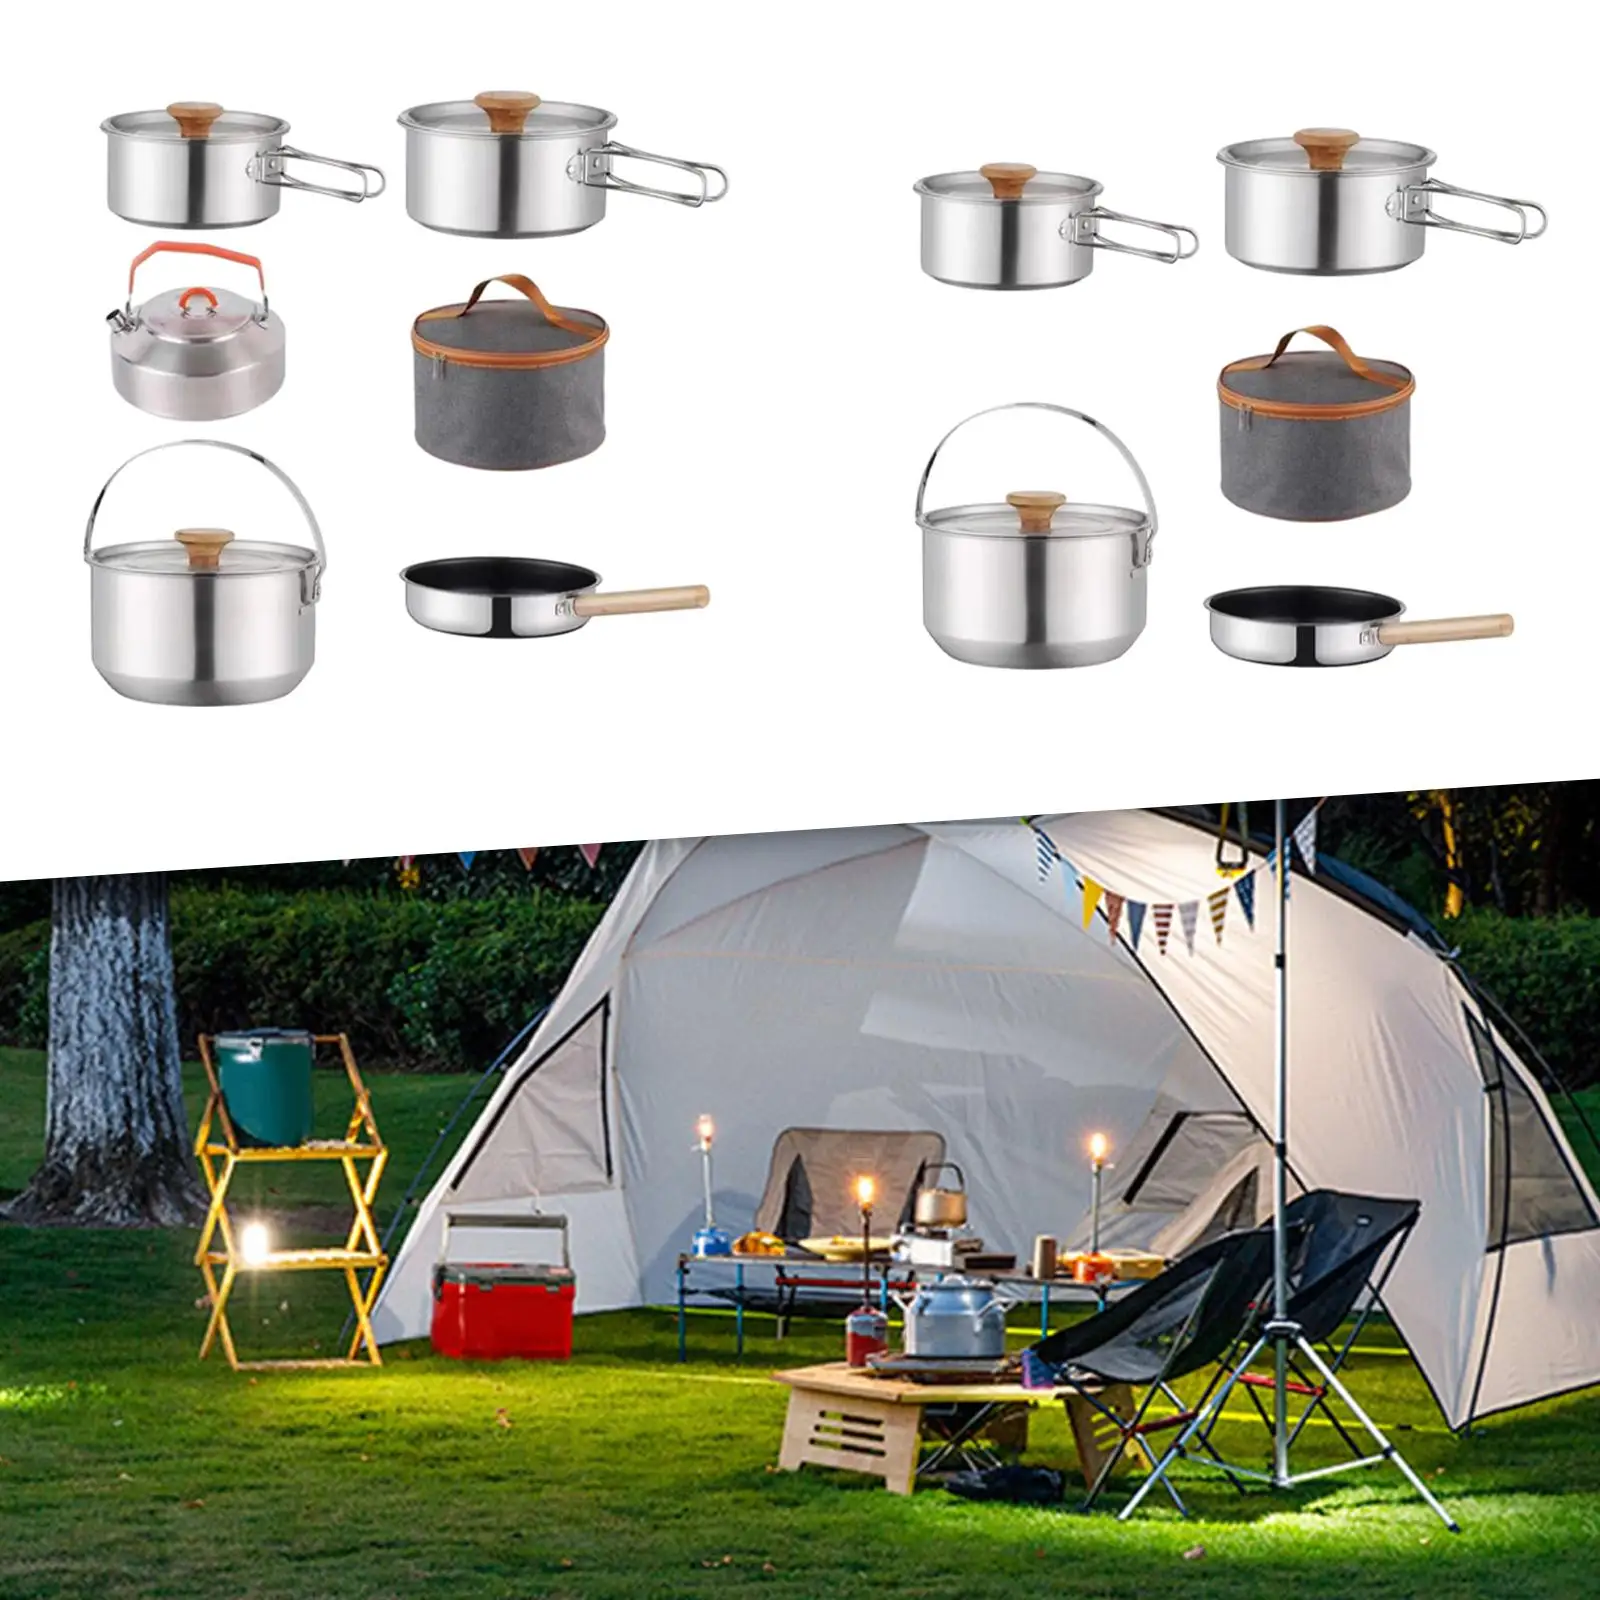 Camping Cookware Kit Portable Backpacking Picnic Lightweight Outdoor Pot